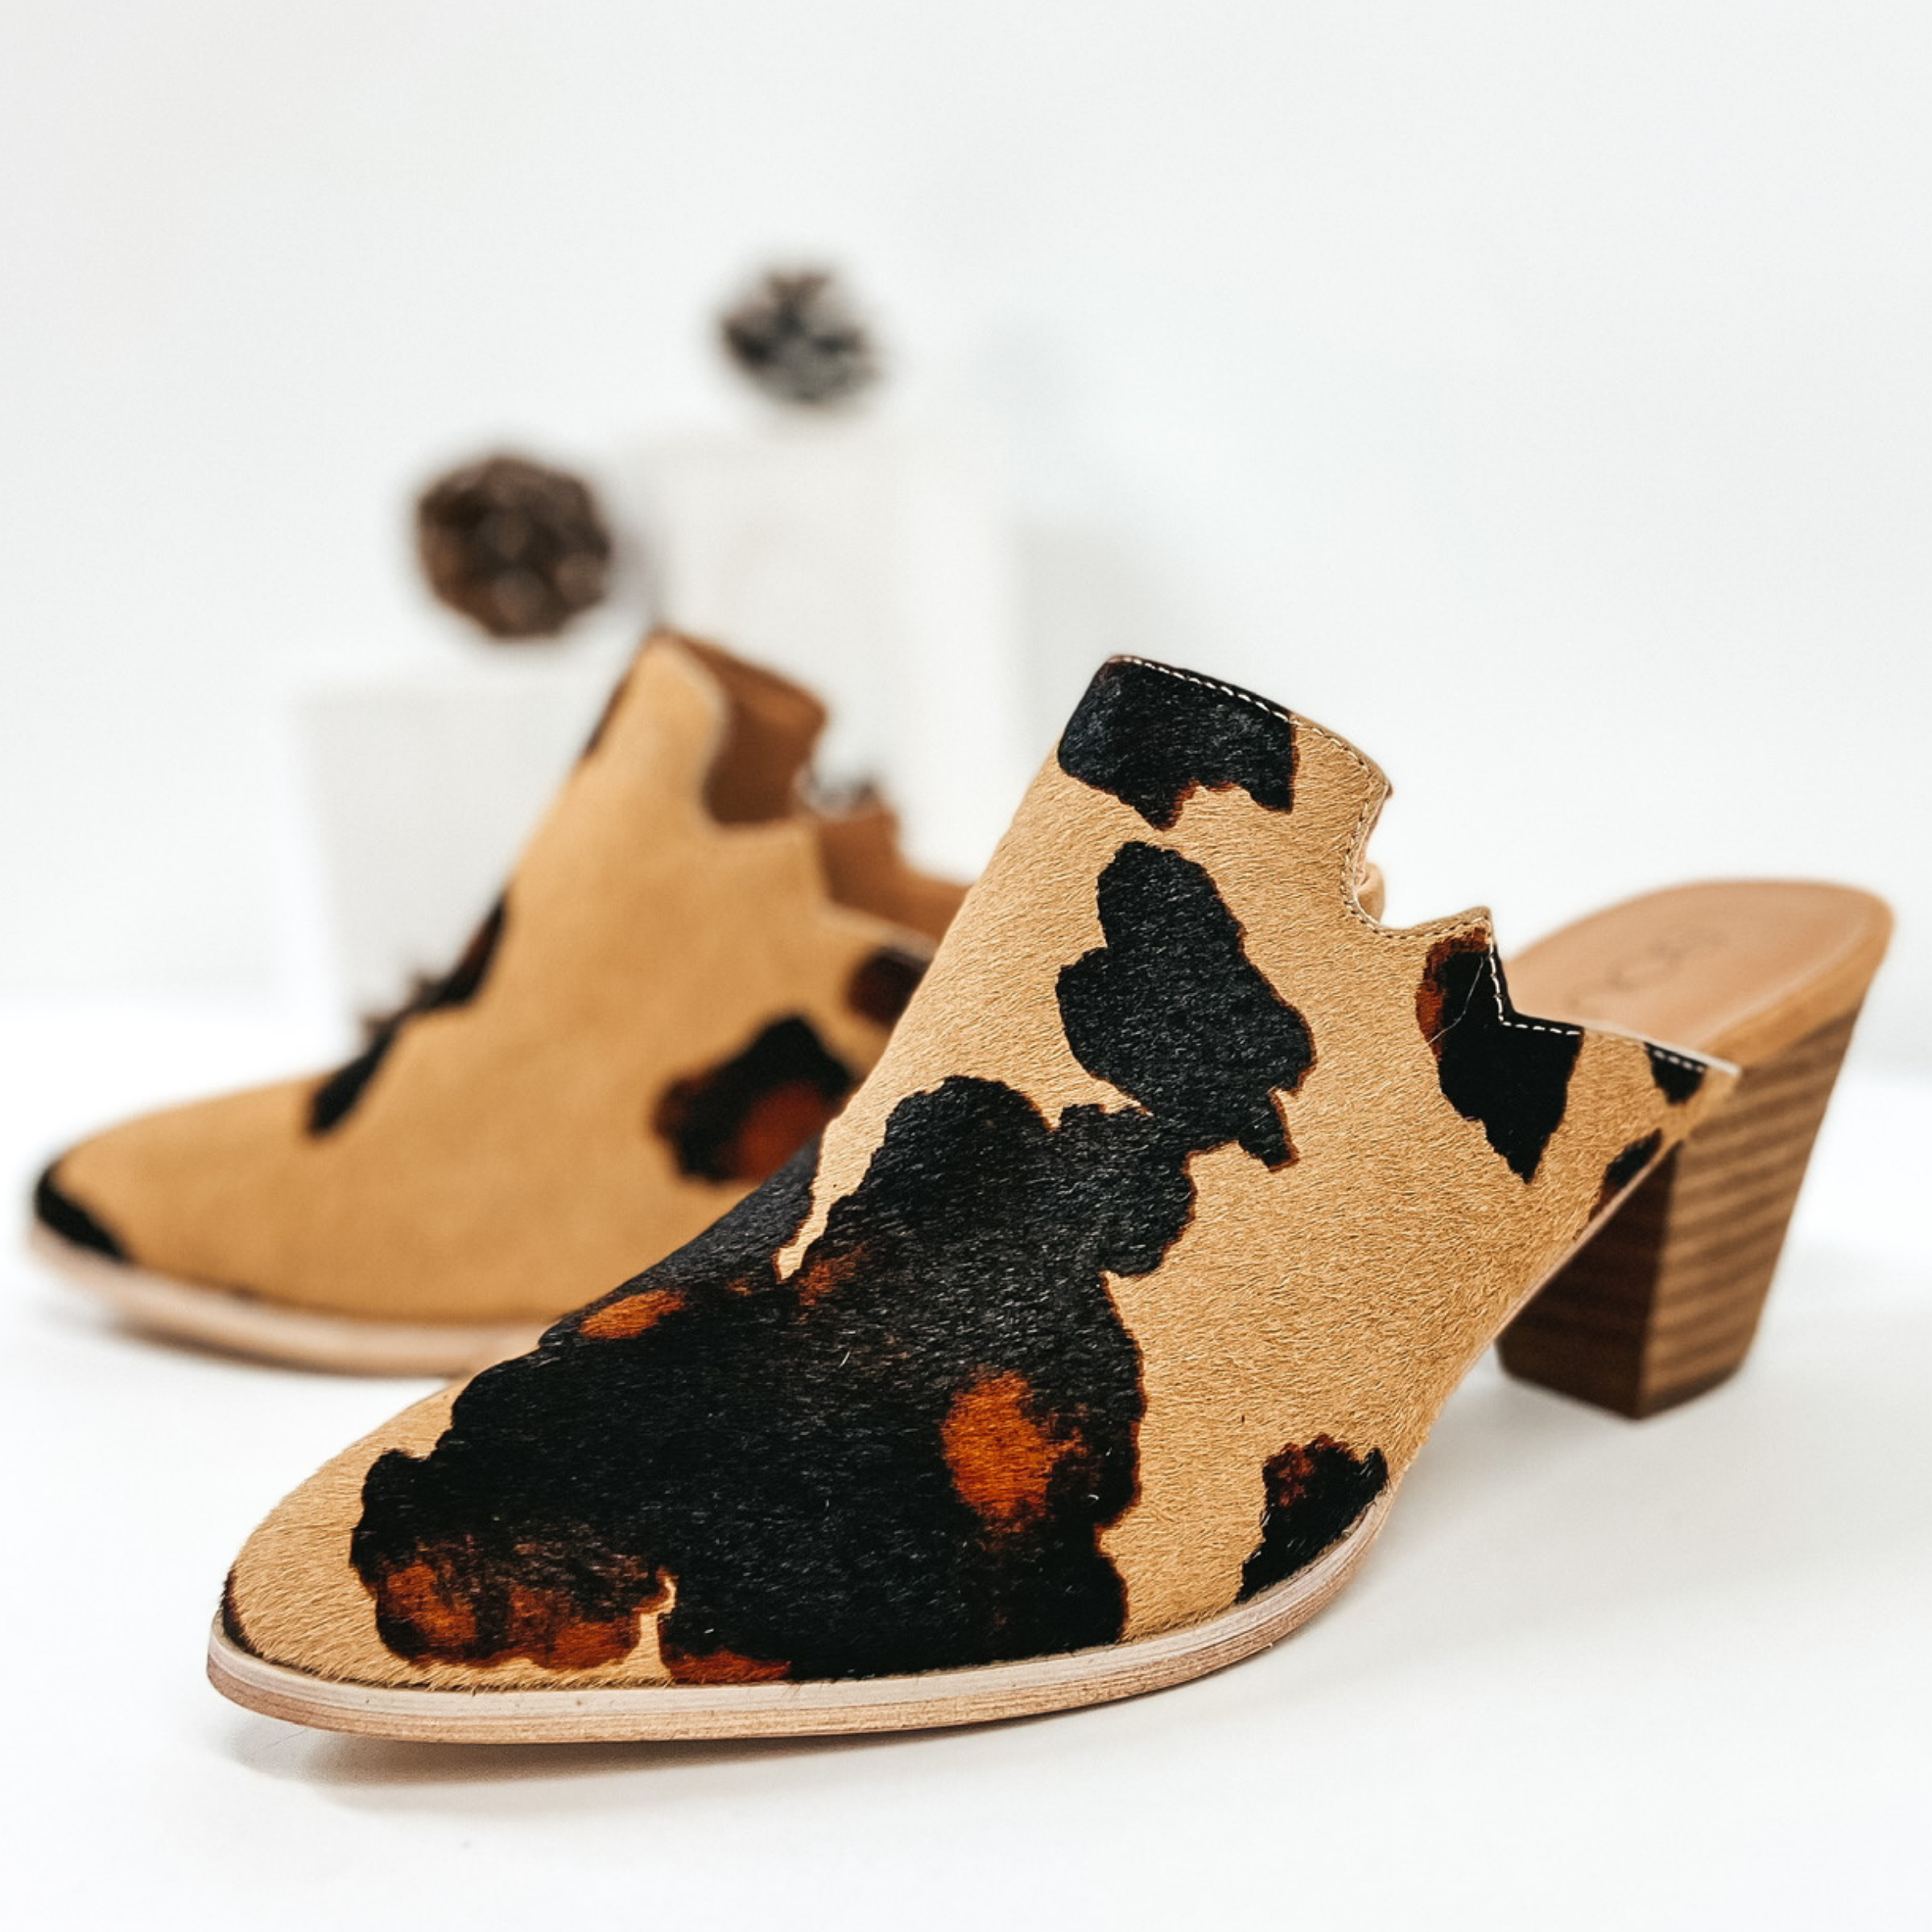 Tan cow print hair on hide heeled mules. Pictured on white background with pinecones.